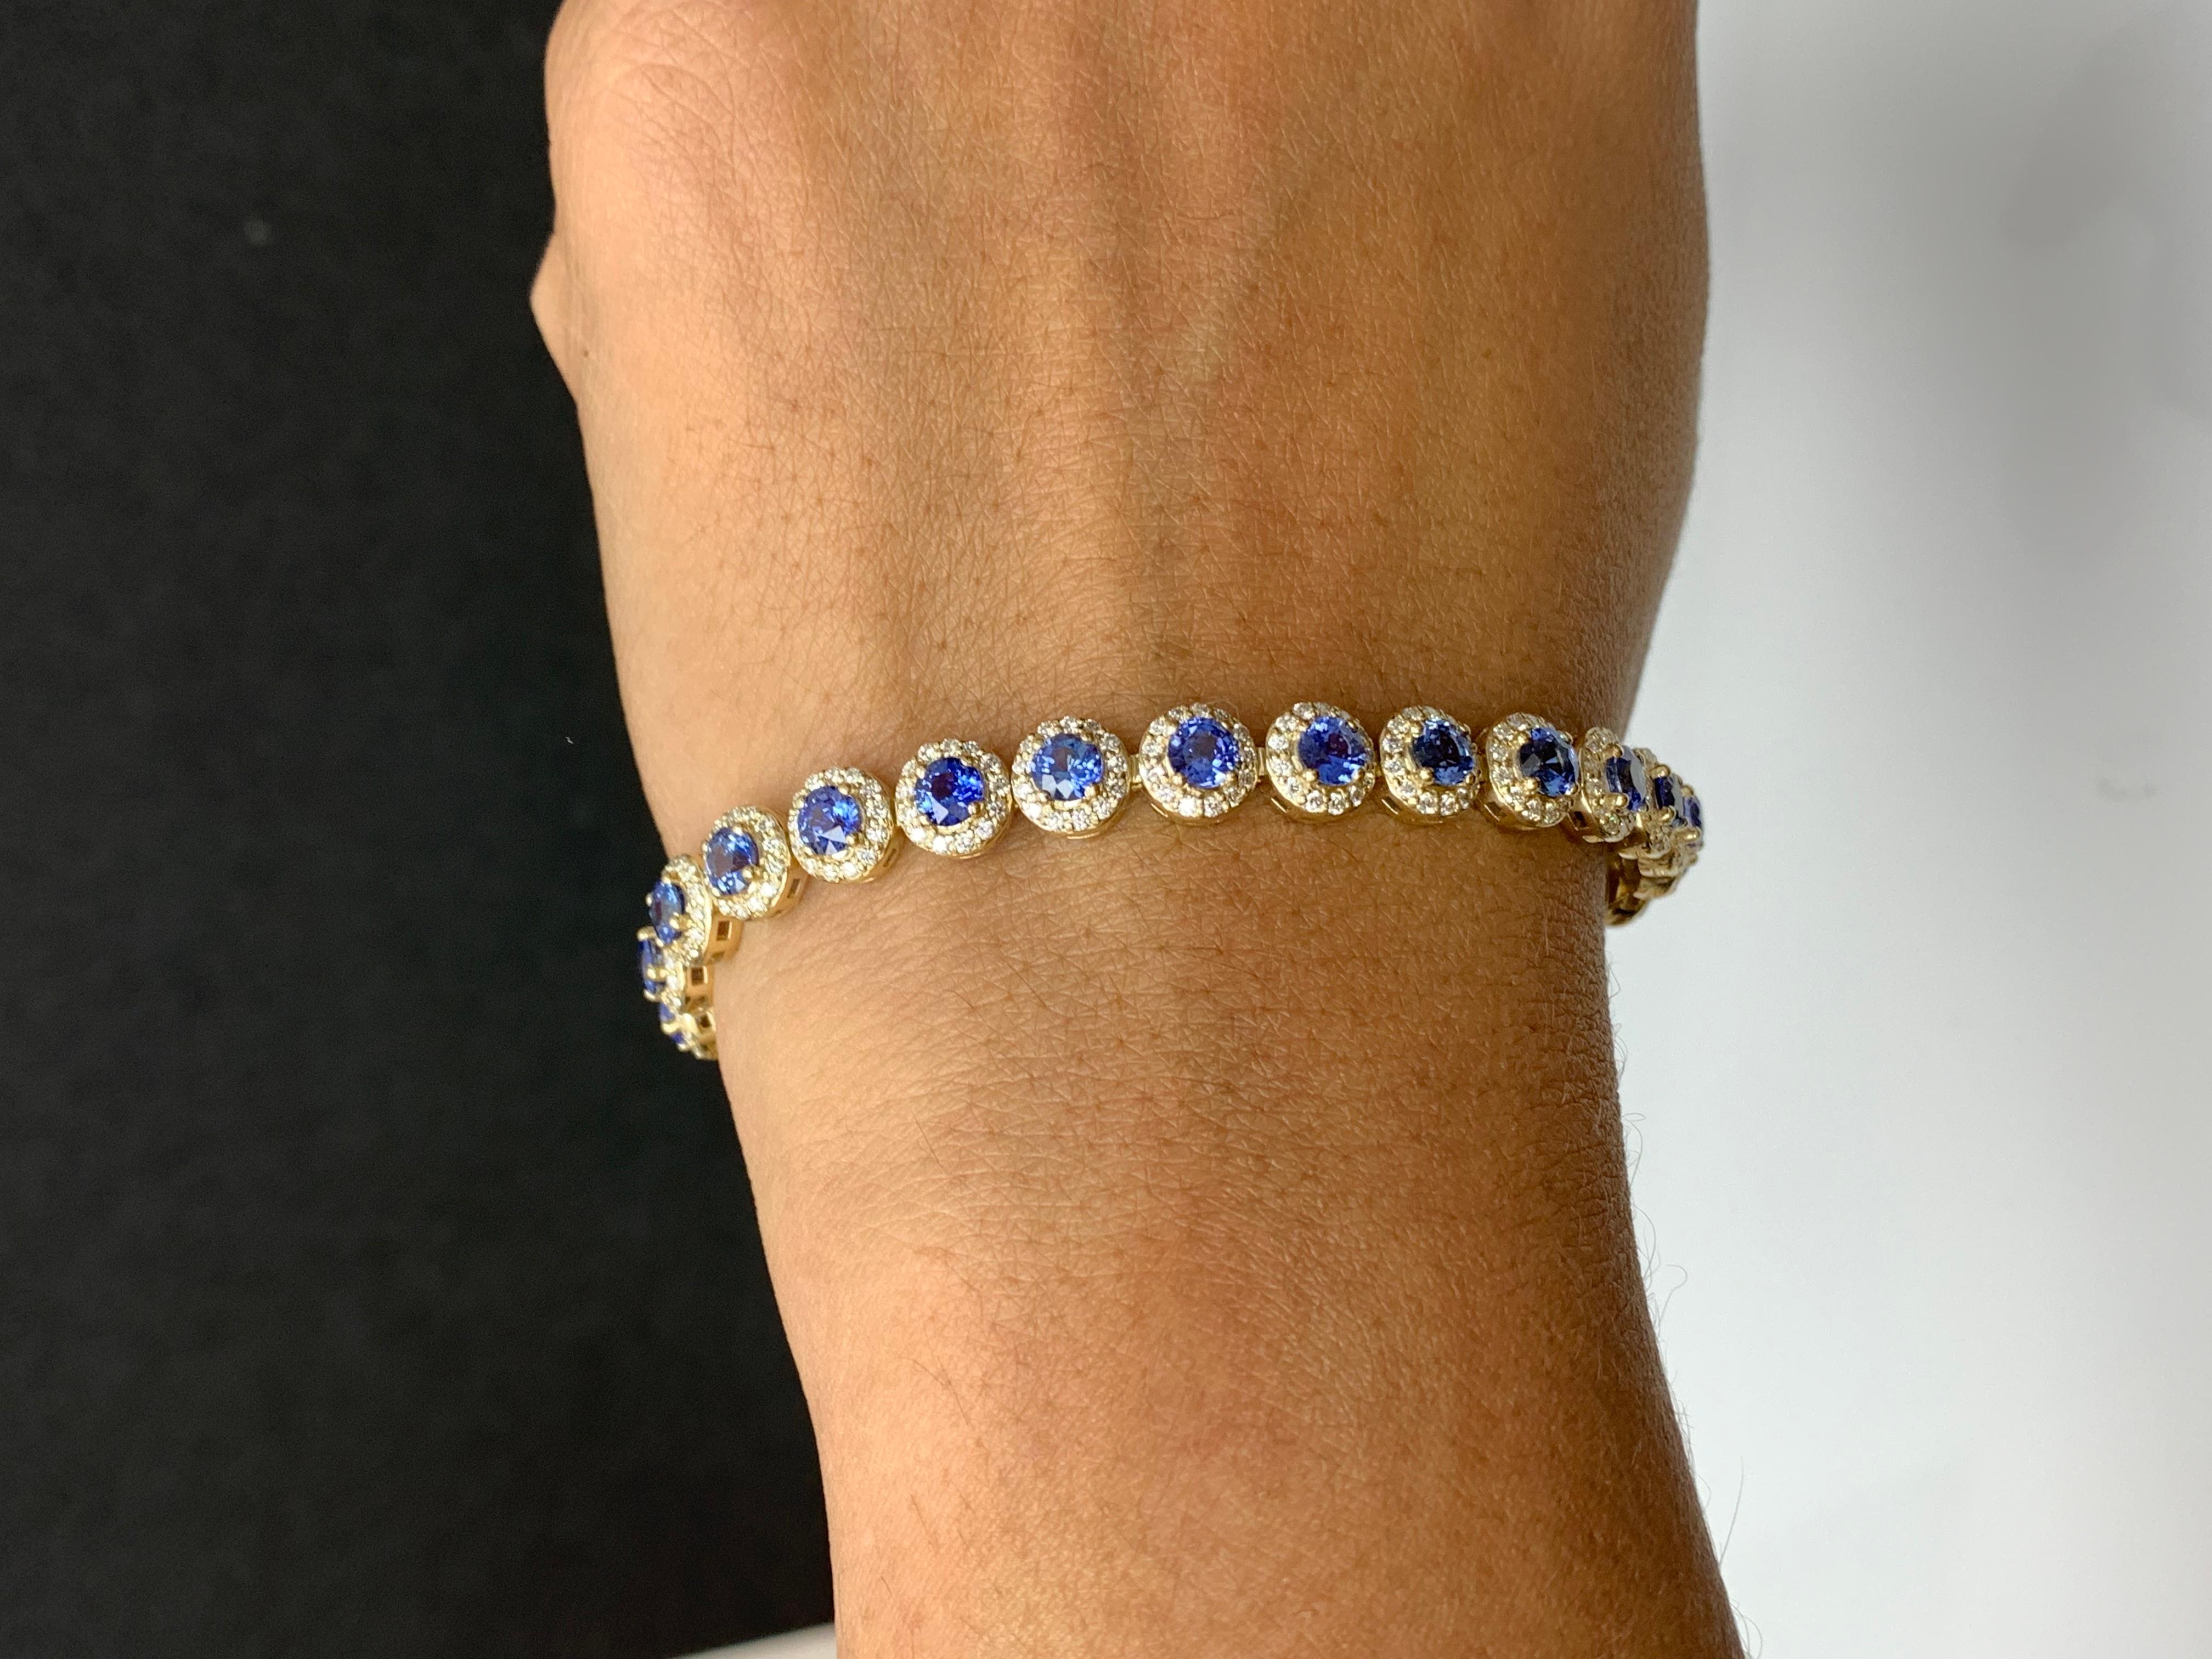 This gorgeous bracelet features 26 round brilliant blue sapphires weighing 7.47 carats total. Each stone is surrounded by a single row of small round 338 diamonds weighing 2.31 carats total. Set in 14k yellow gold.

Style available in different